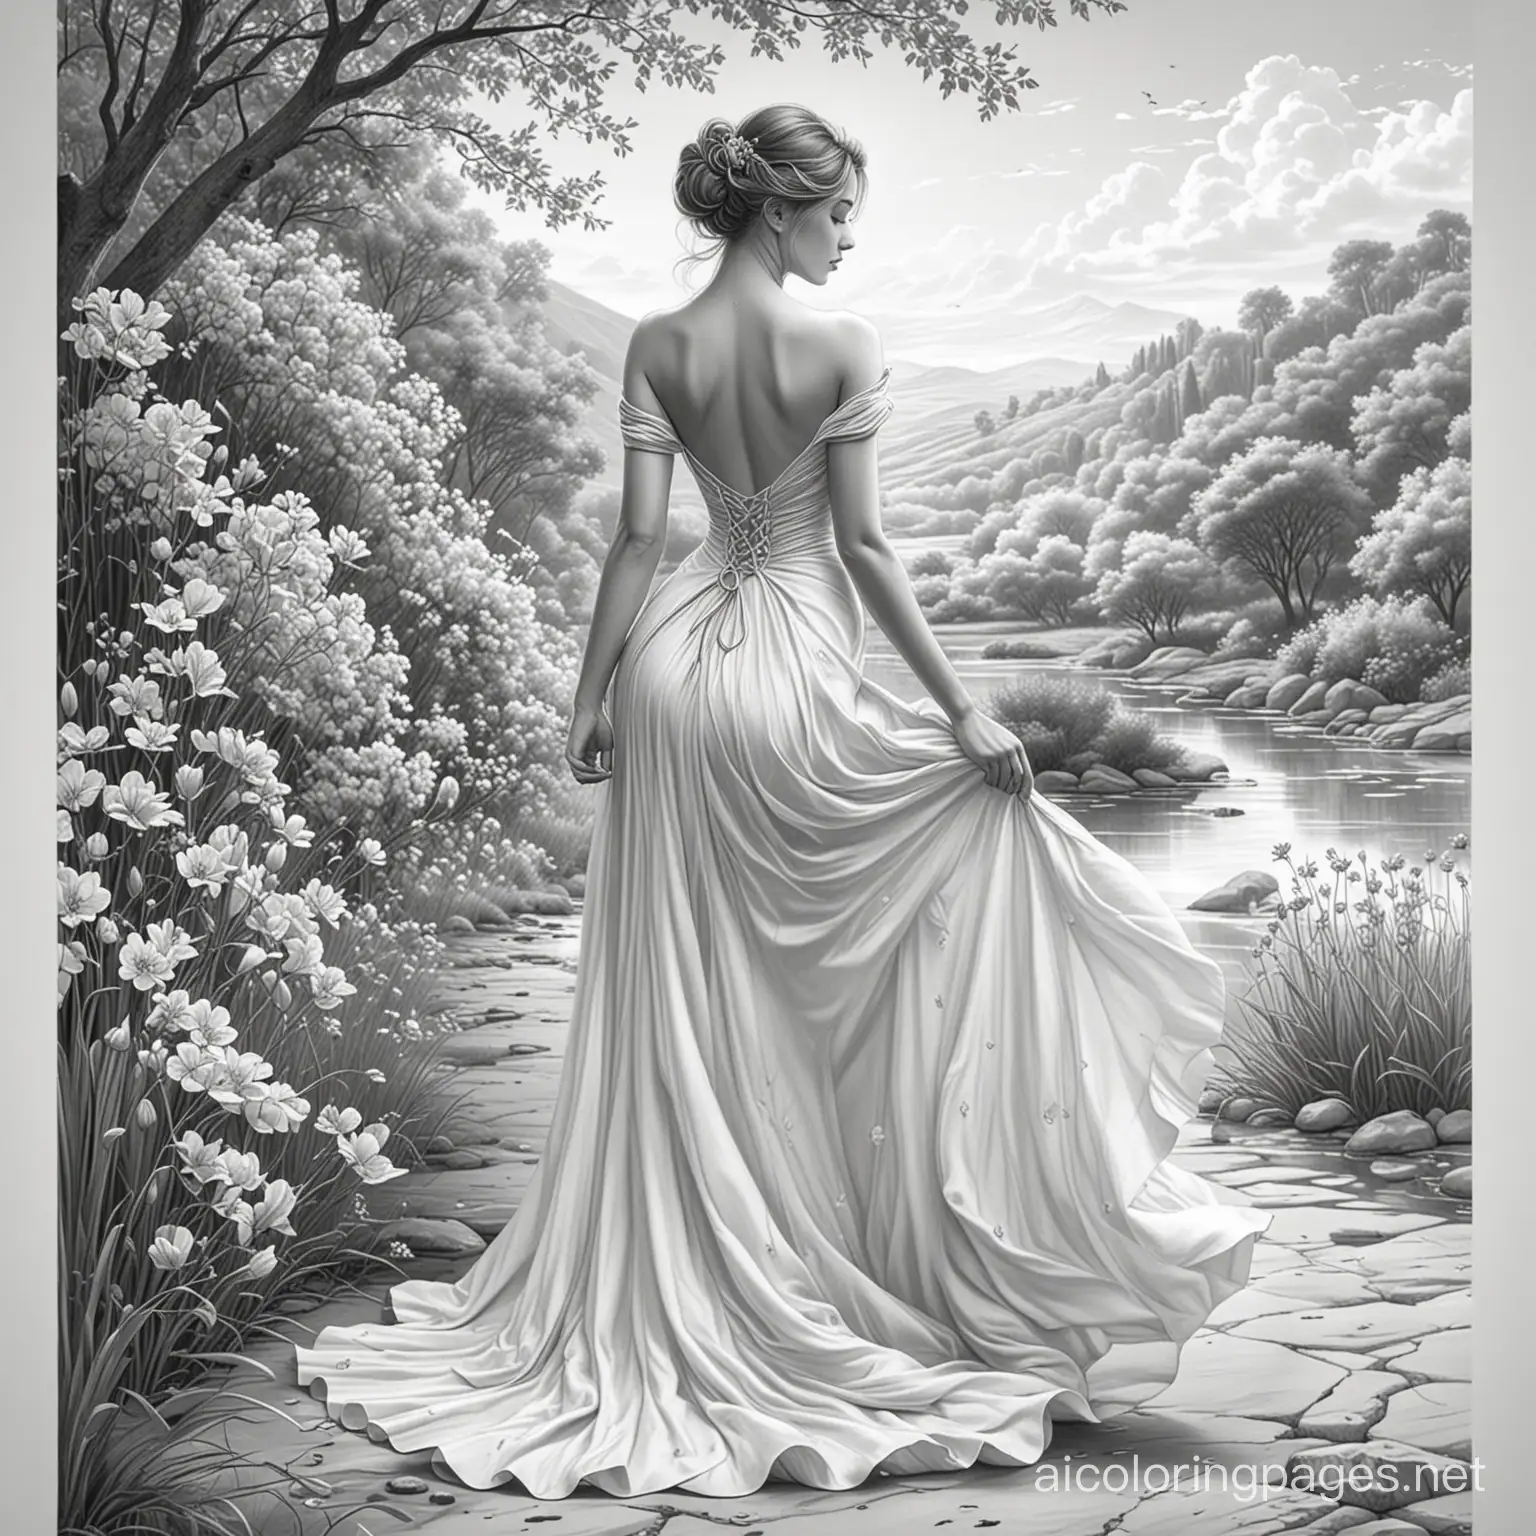 Elegant-Woman-in-Flowing-Dress-Amidst-Serene-Landscape-Coloring-Page